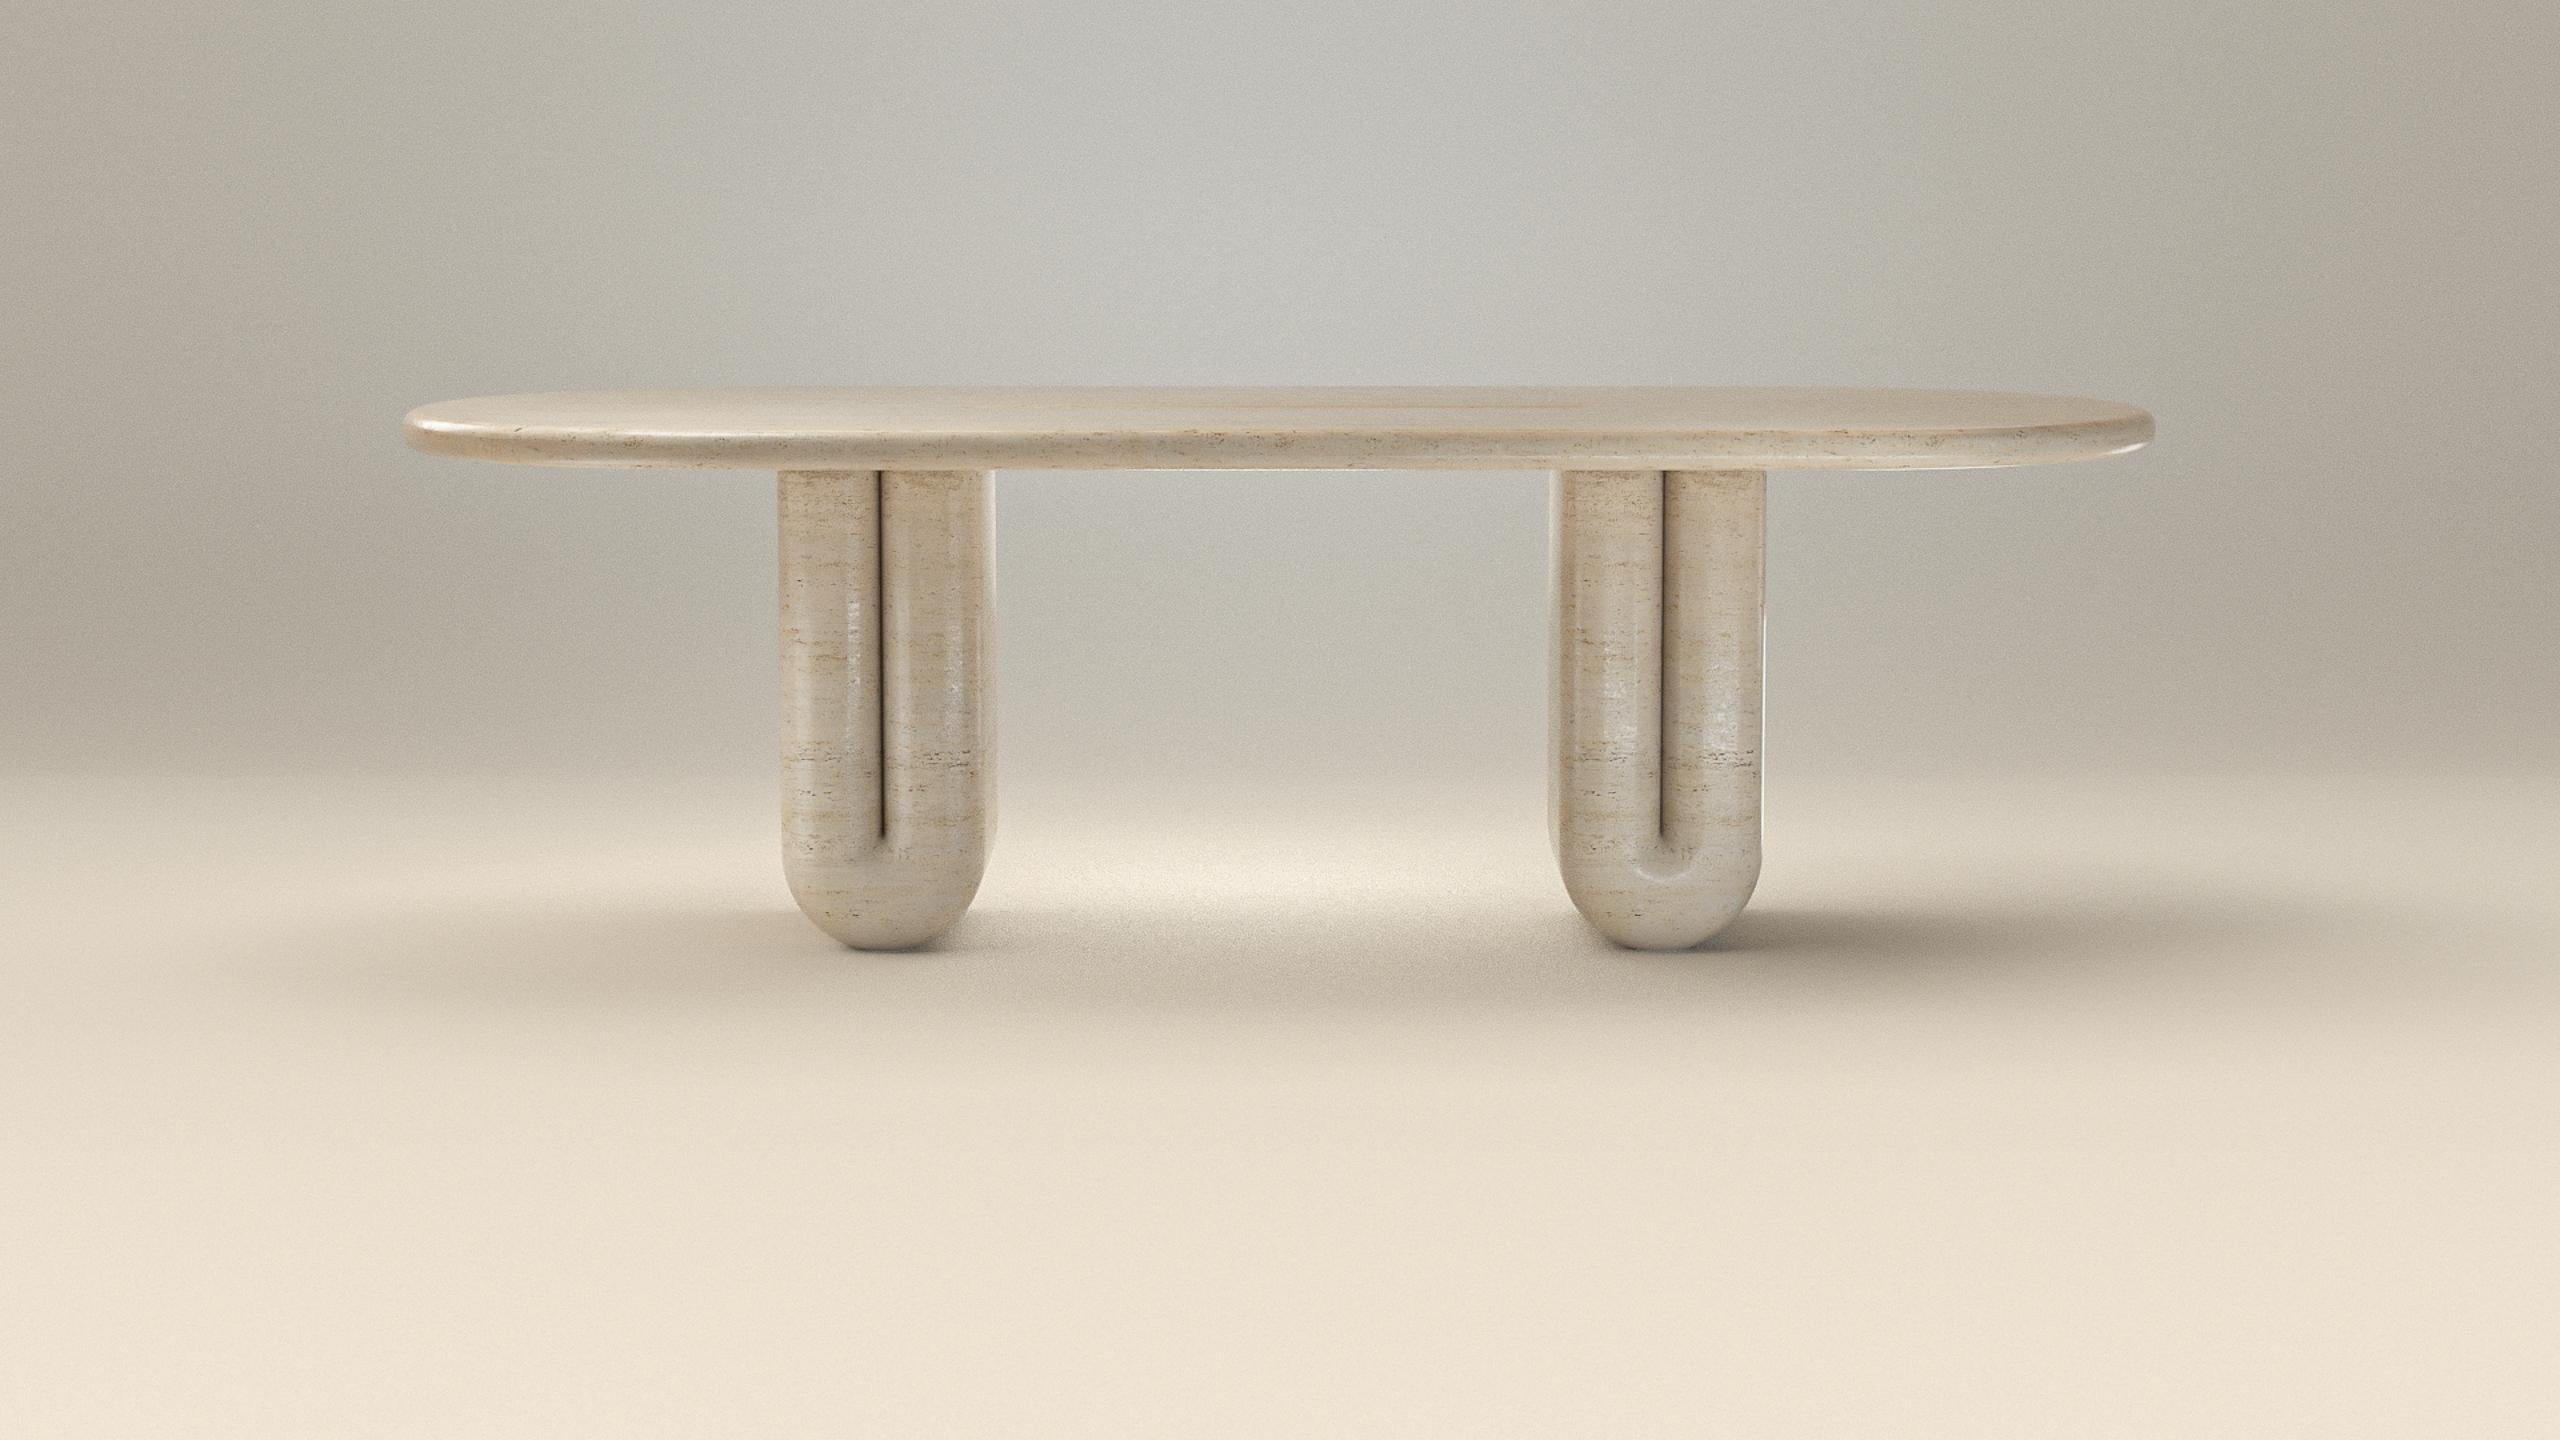 Travertin chubby table by Arthur Vallin
2 Legs
Numbered Edition
Dimensions: W 112.25 x D 49.25 x H 33.5 inch
Materials: Travertin Navona
Finishing: Matte Un-honed
Other materials and dimensions can be chosen.

French Artist, Designer, and